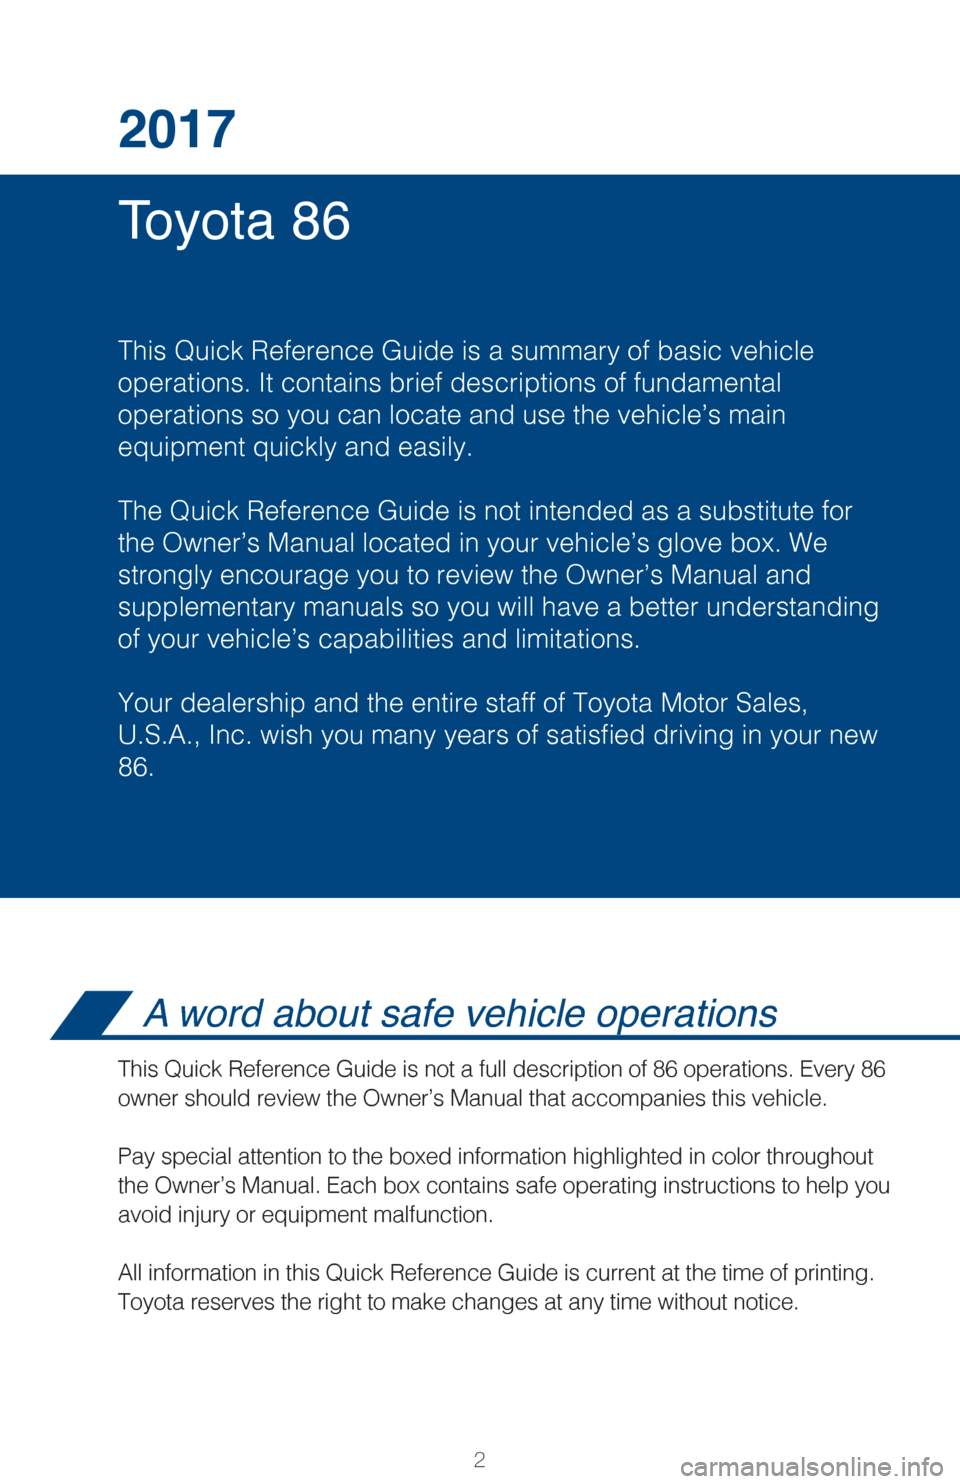 TOYOTA GT86 2017 1.G Quick Reference Guide 2
Toyota 86 2017
This Quick Reference Guide is a summary of basic vehicle
operations. It contains brief descriptions of fundamental
operations so you can locate and use the vehicle’s main 
equipment